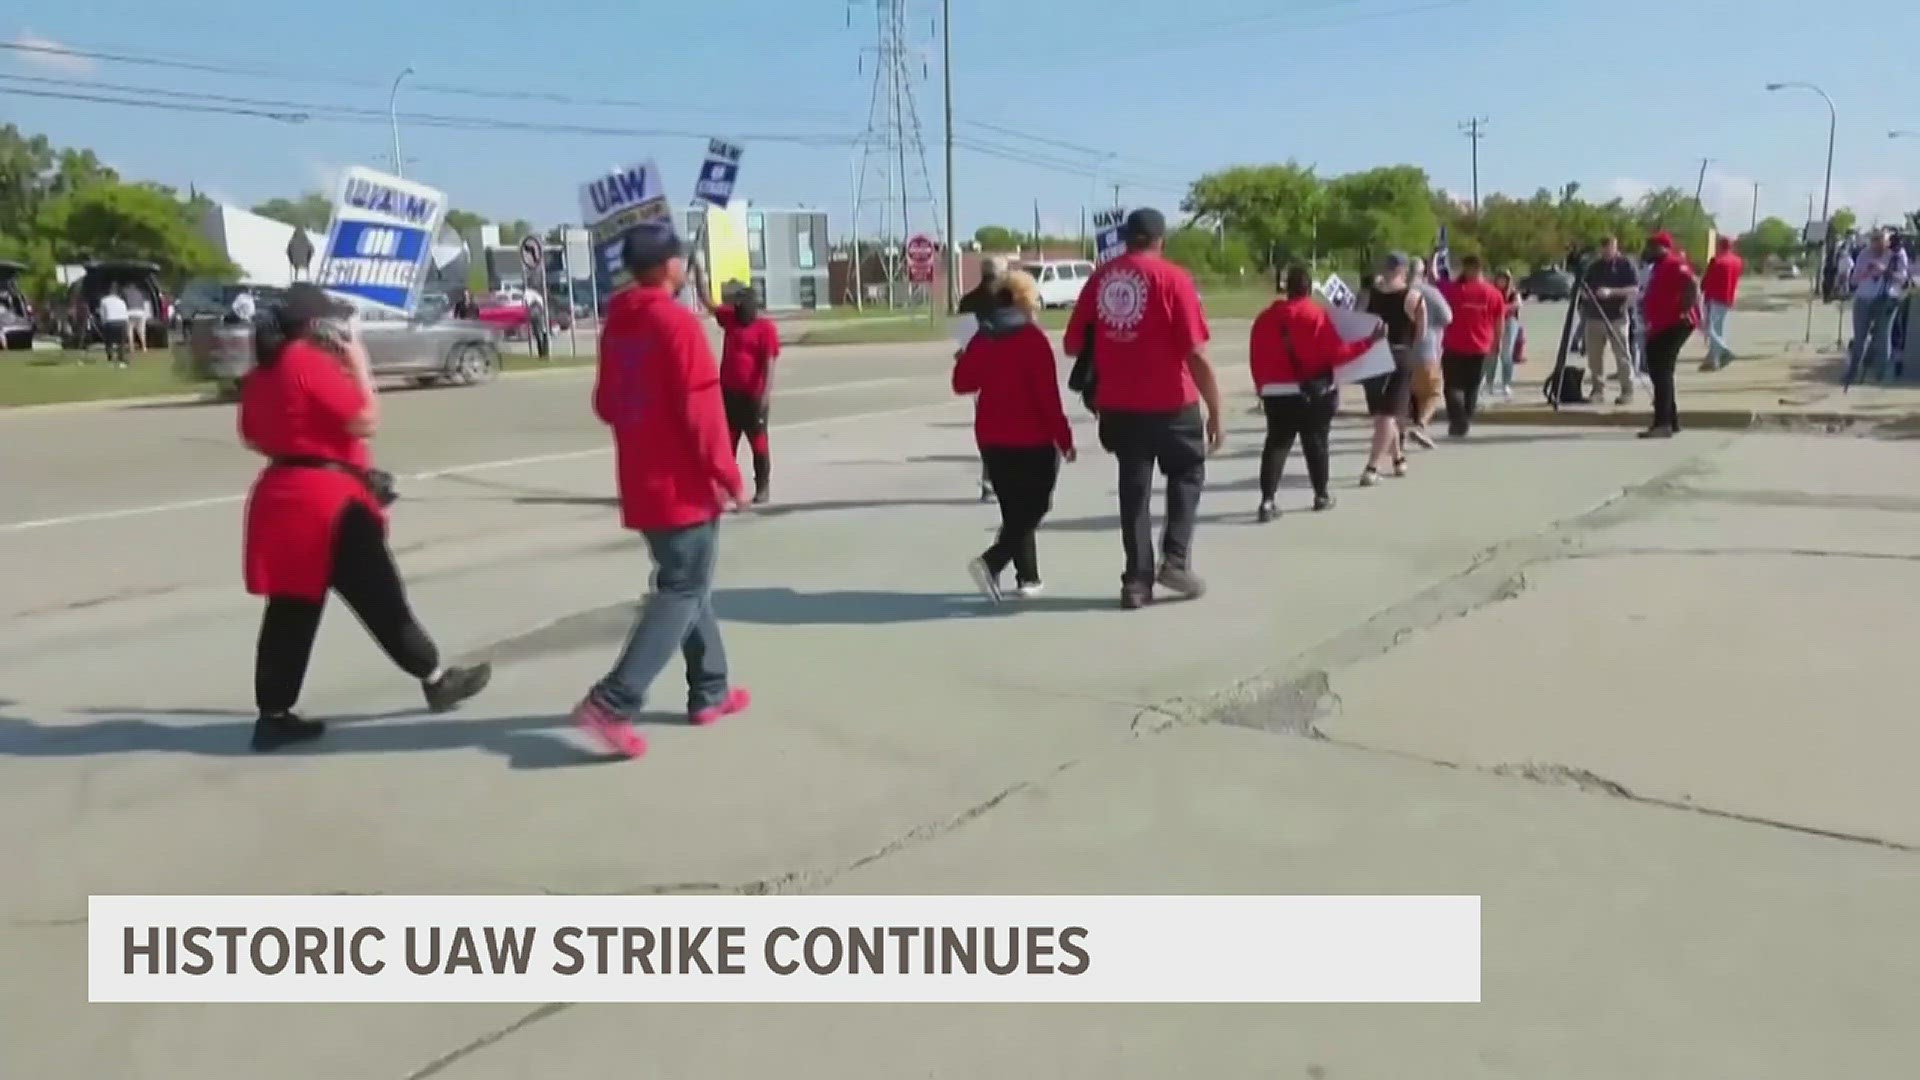 News 8 and financial expert Mike Grywacheski is analyzing the financial impact of the UAW strike in the long term.